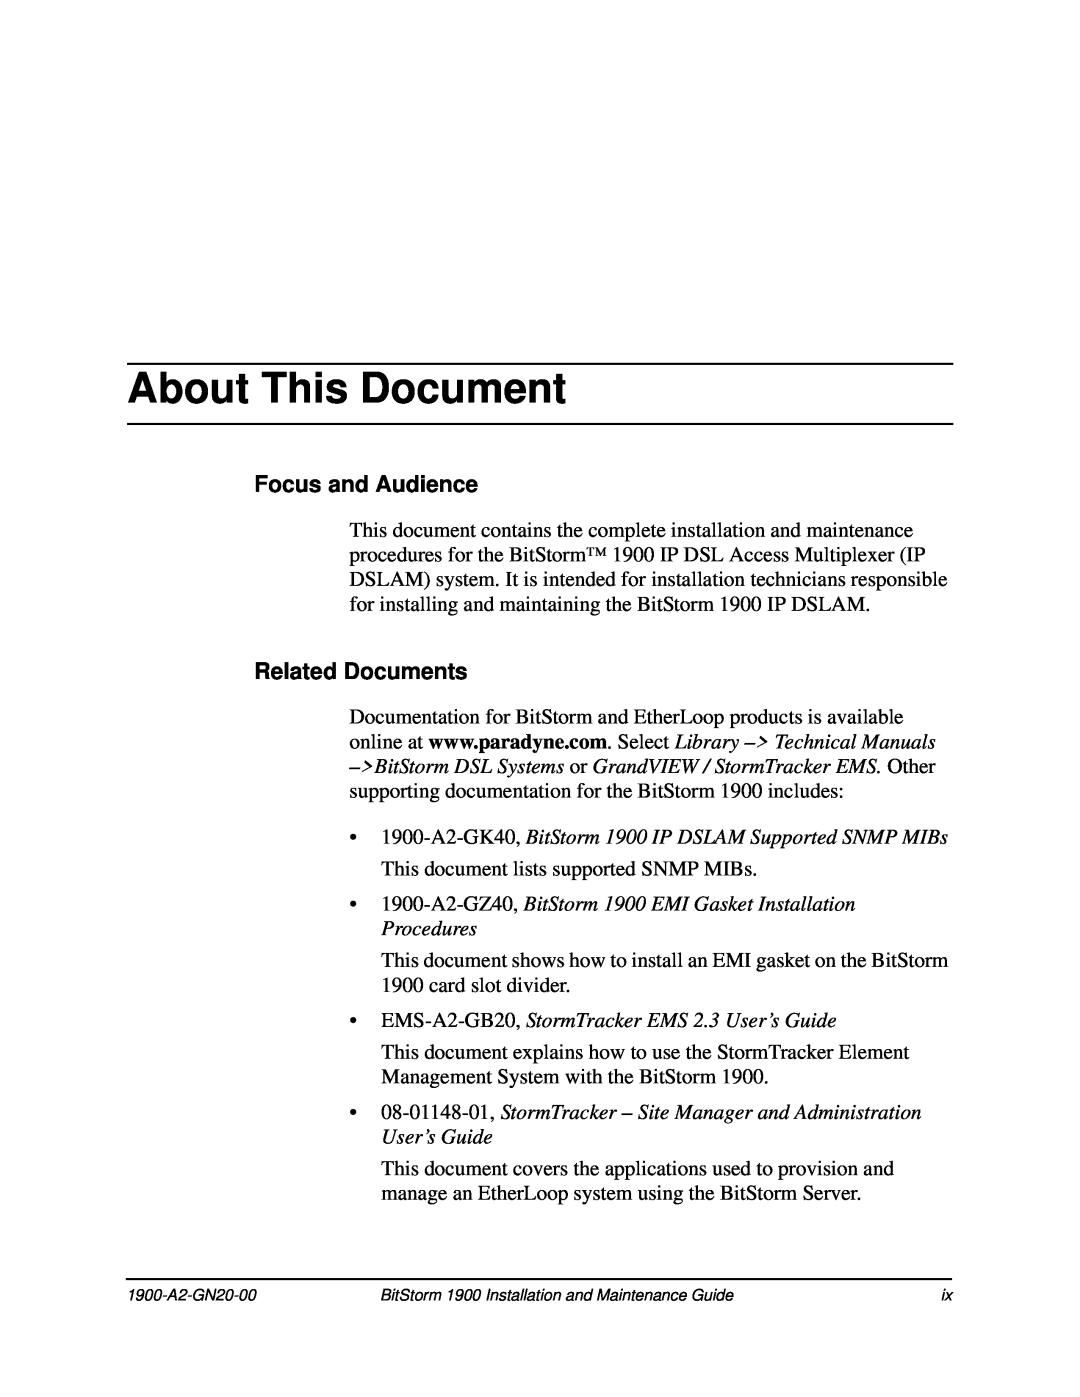 Paradyne 1900 About This Document, Focus and Audience, Related Documents, EMS-A2-GB20, StormTracker EMS 2.3 User’s Guide 